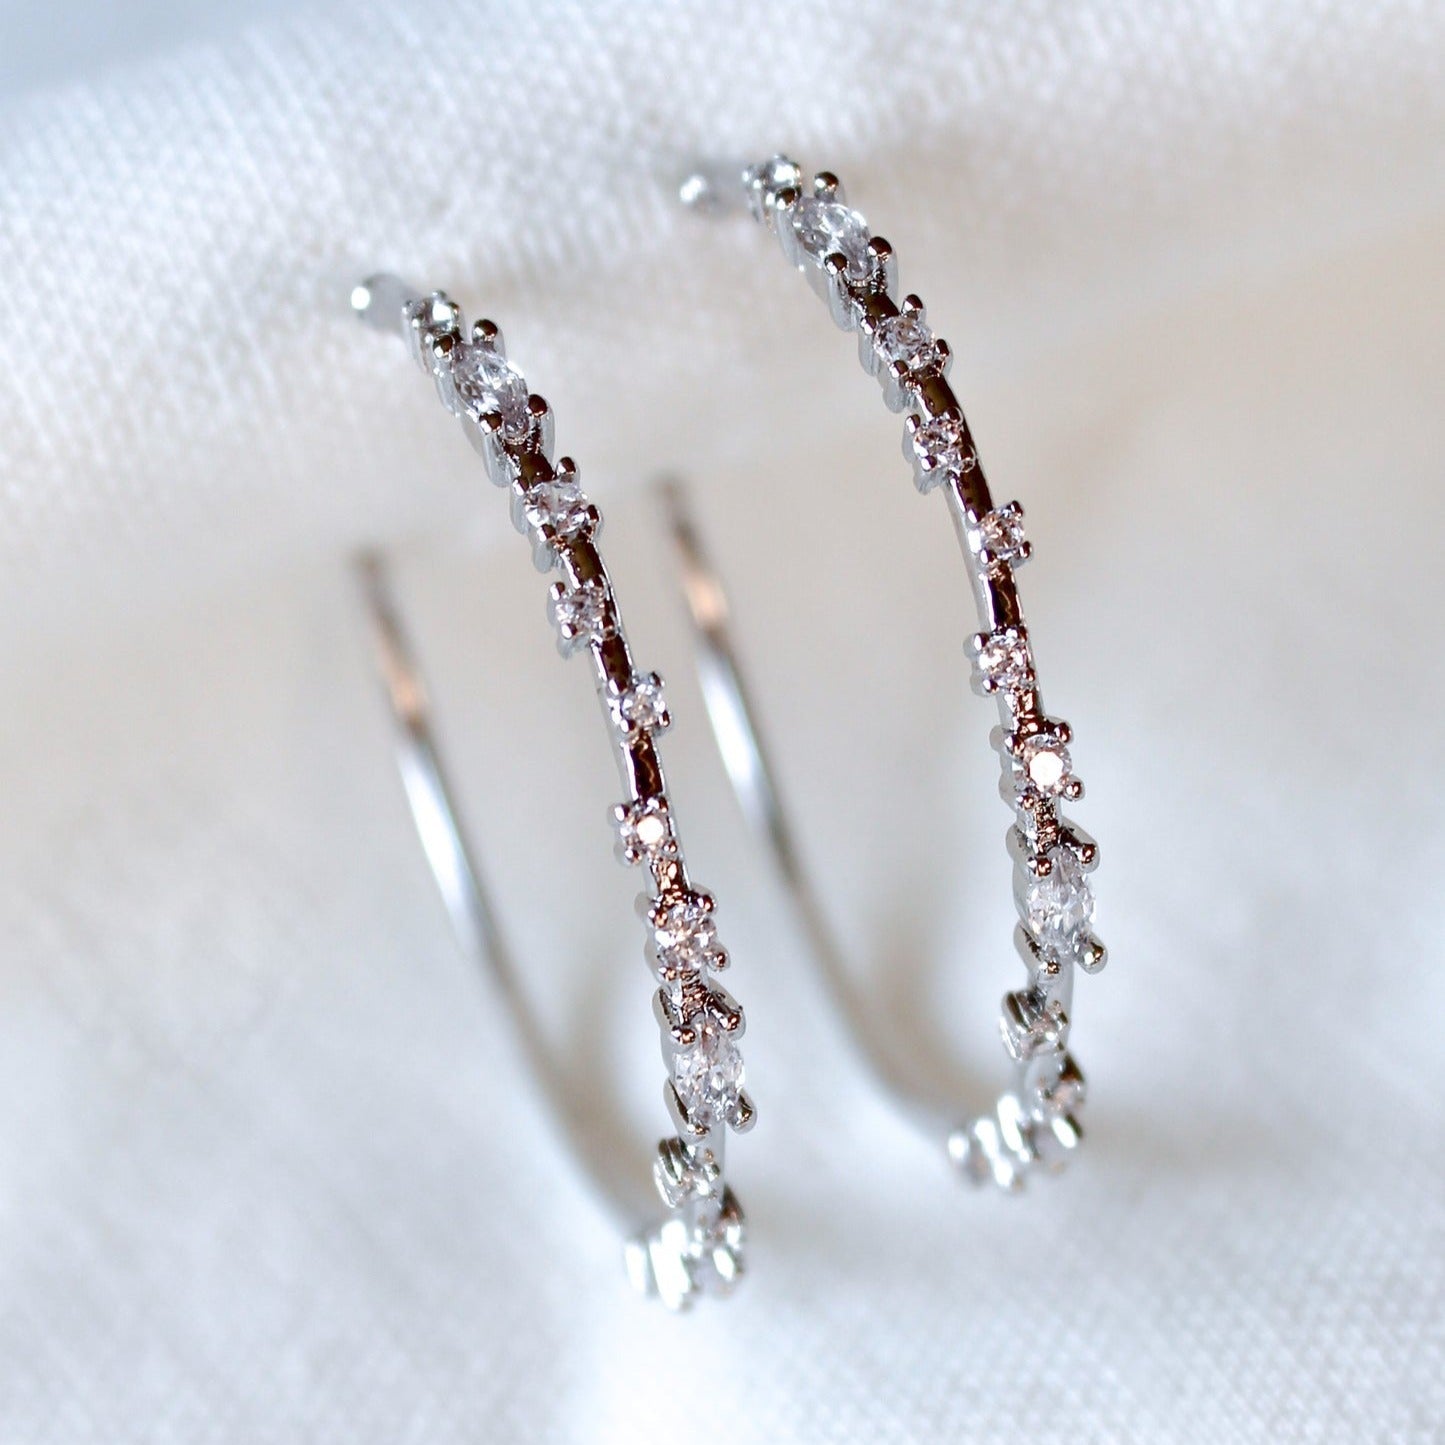 Kinsey Designs | Chase Large Hoop Earrings in Silver - Giddy Up Glamour Boutique